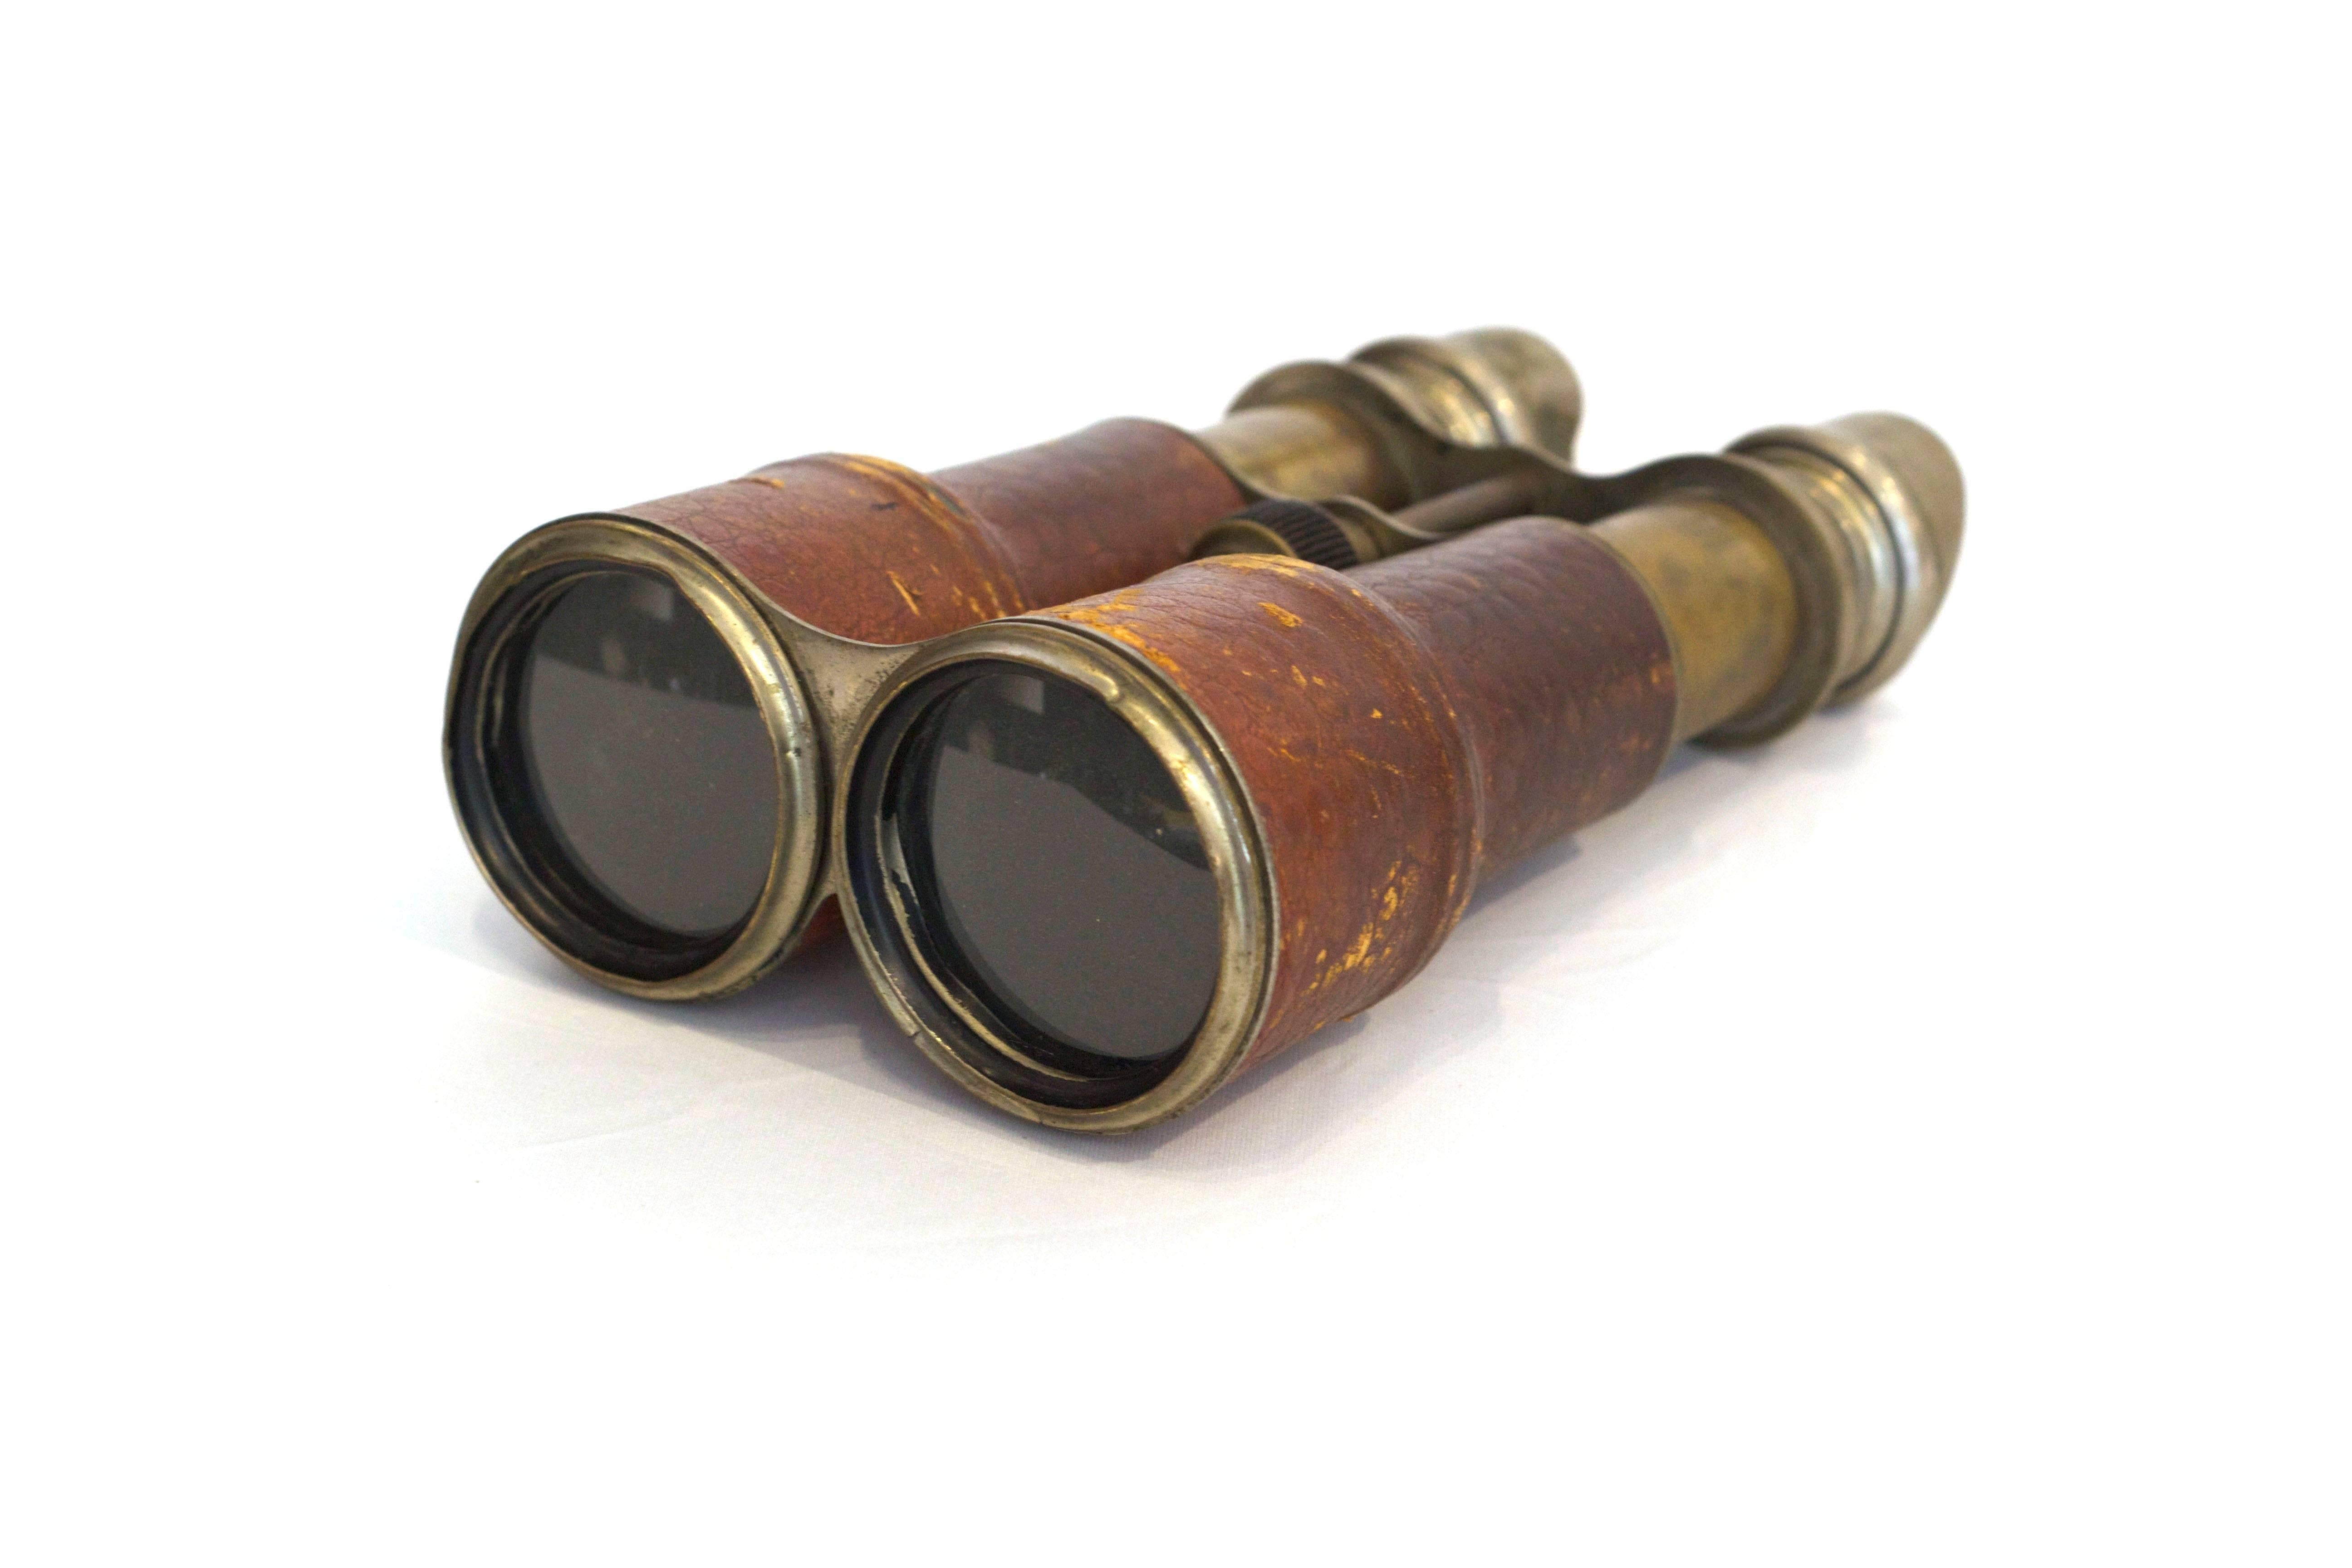 Expandable brass binoculars wrapped in tobacco colored leather. Stamped 